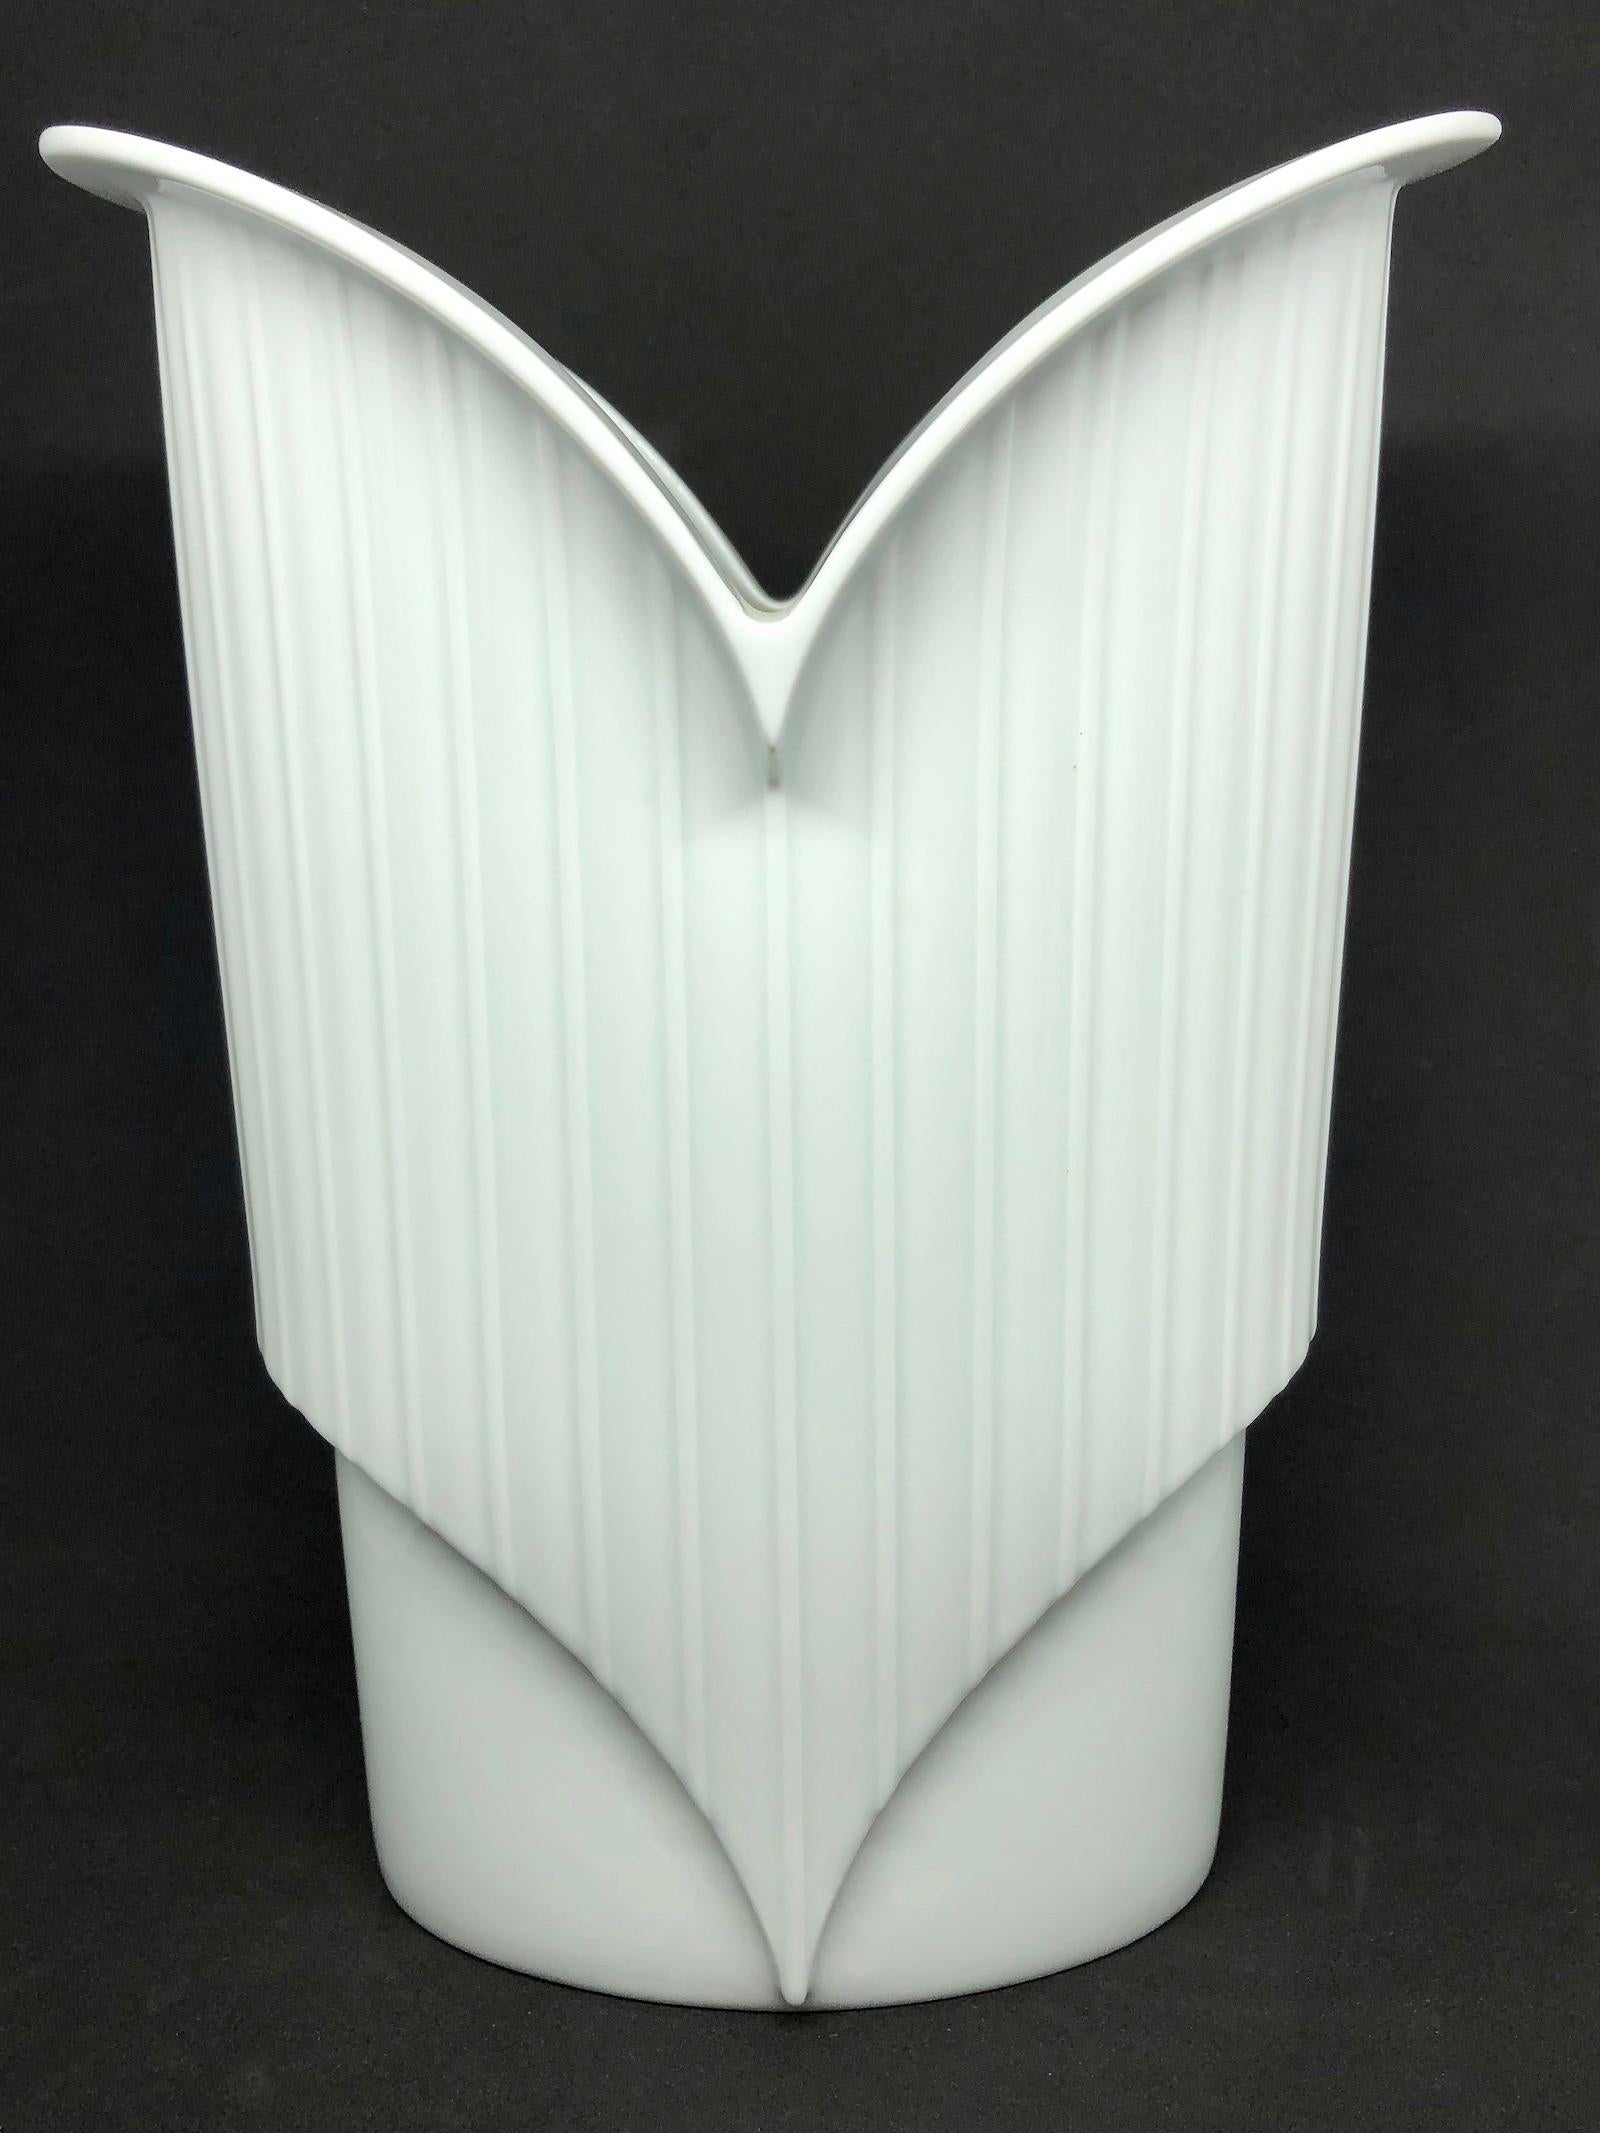 An amazing china porcelain studio art vase made in Germany, by Jan van der Vaart for Rosenthal, circa 1980s. Vase is in very good condition with no chips, cracks, or flea bites. Signed and manufactory mark.